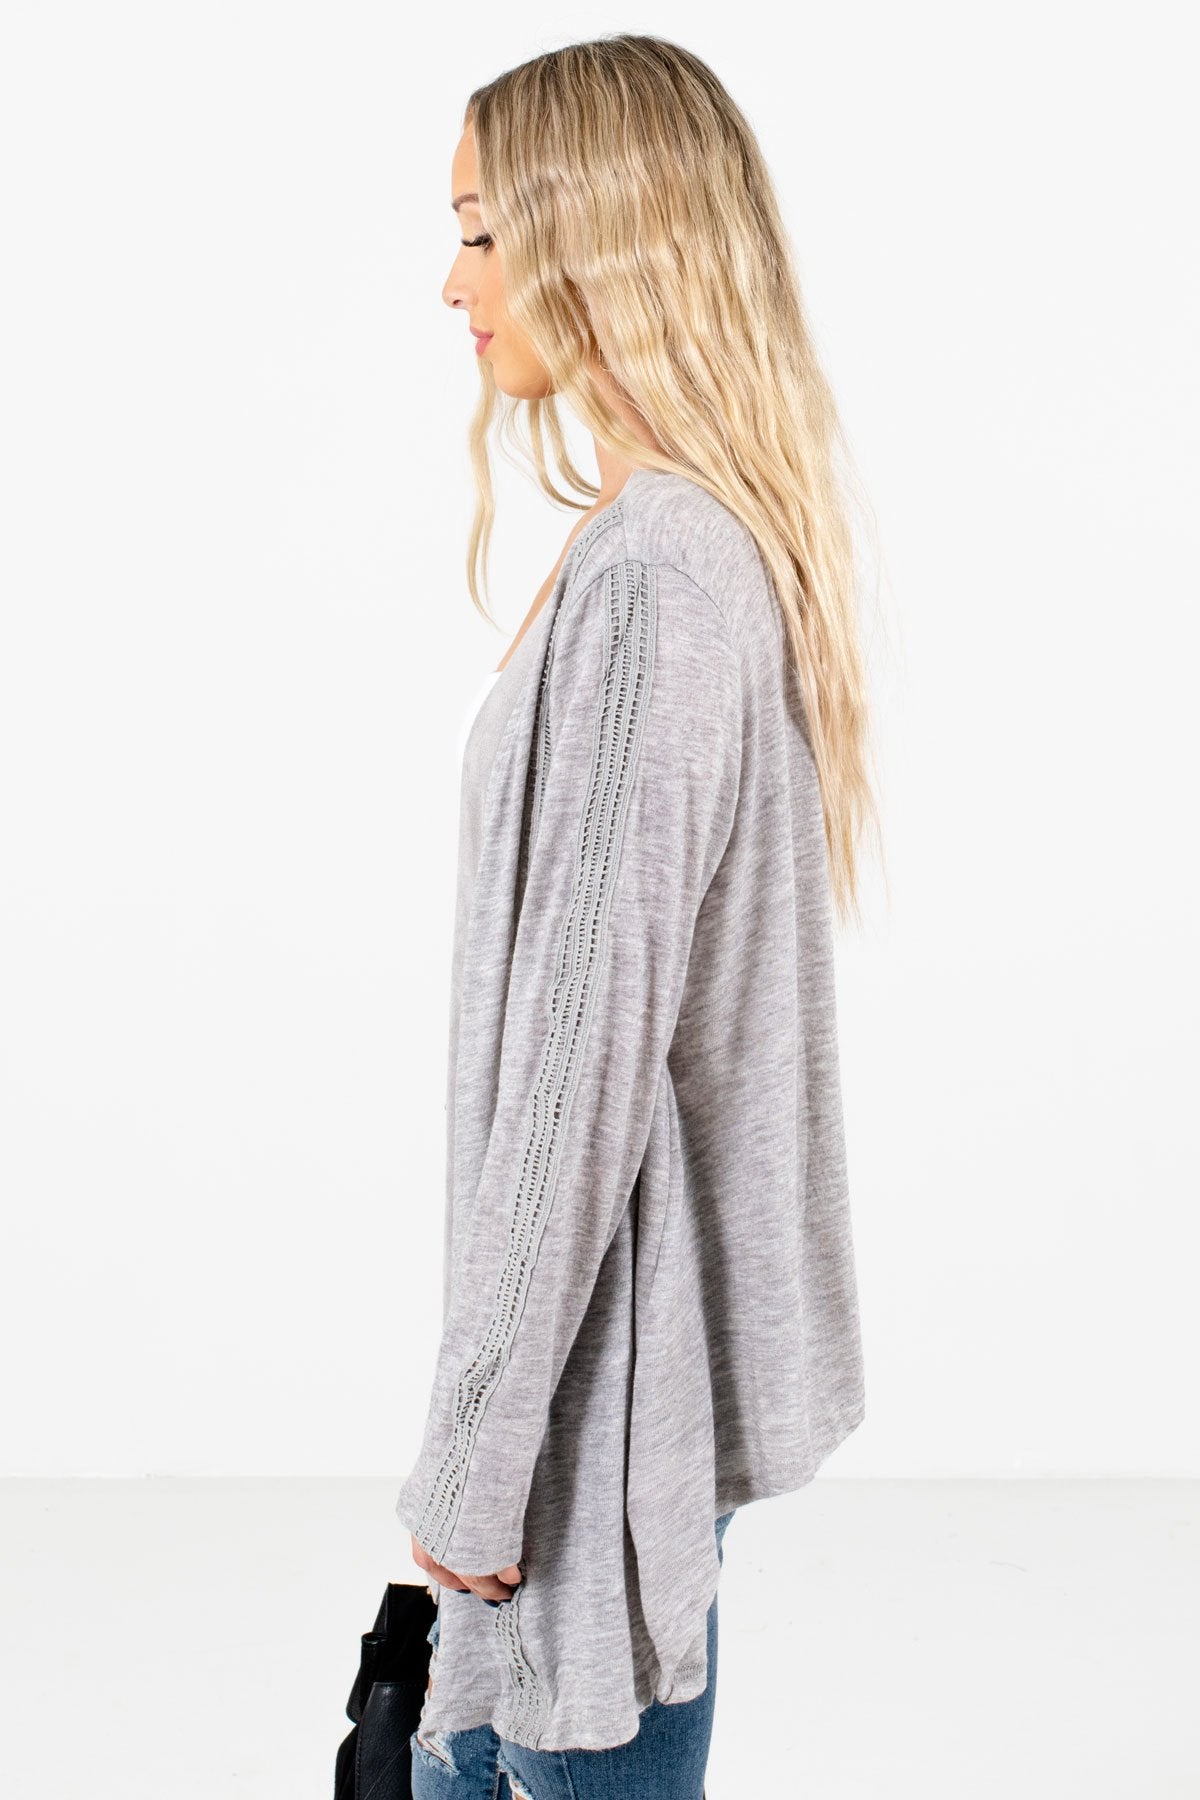 Heather Gray Warm and Cozy Boutique Cardigans for Women